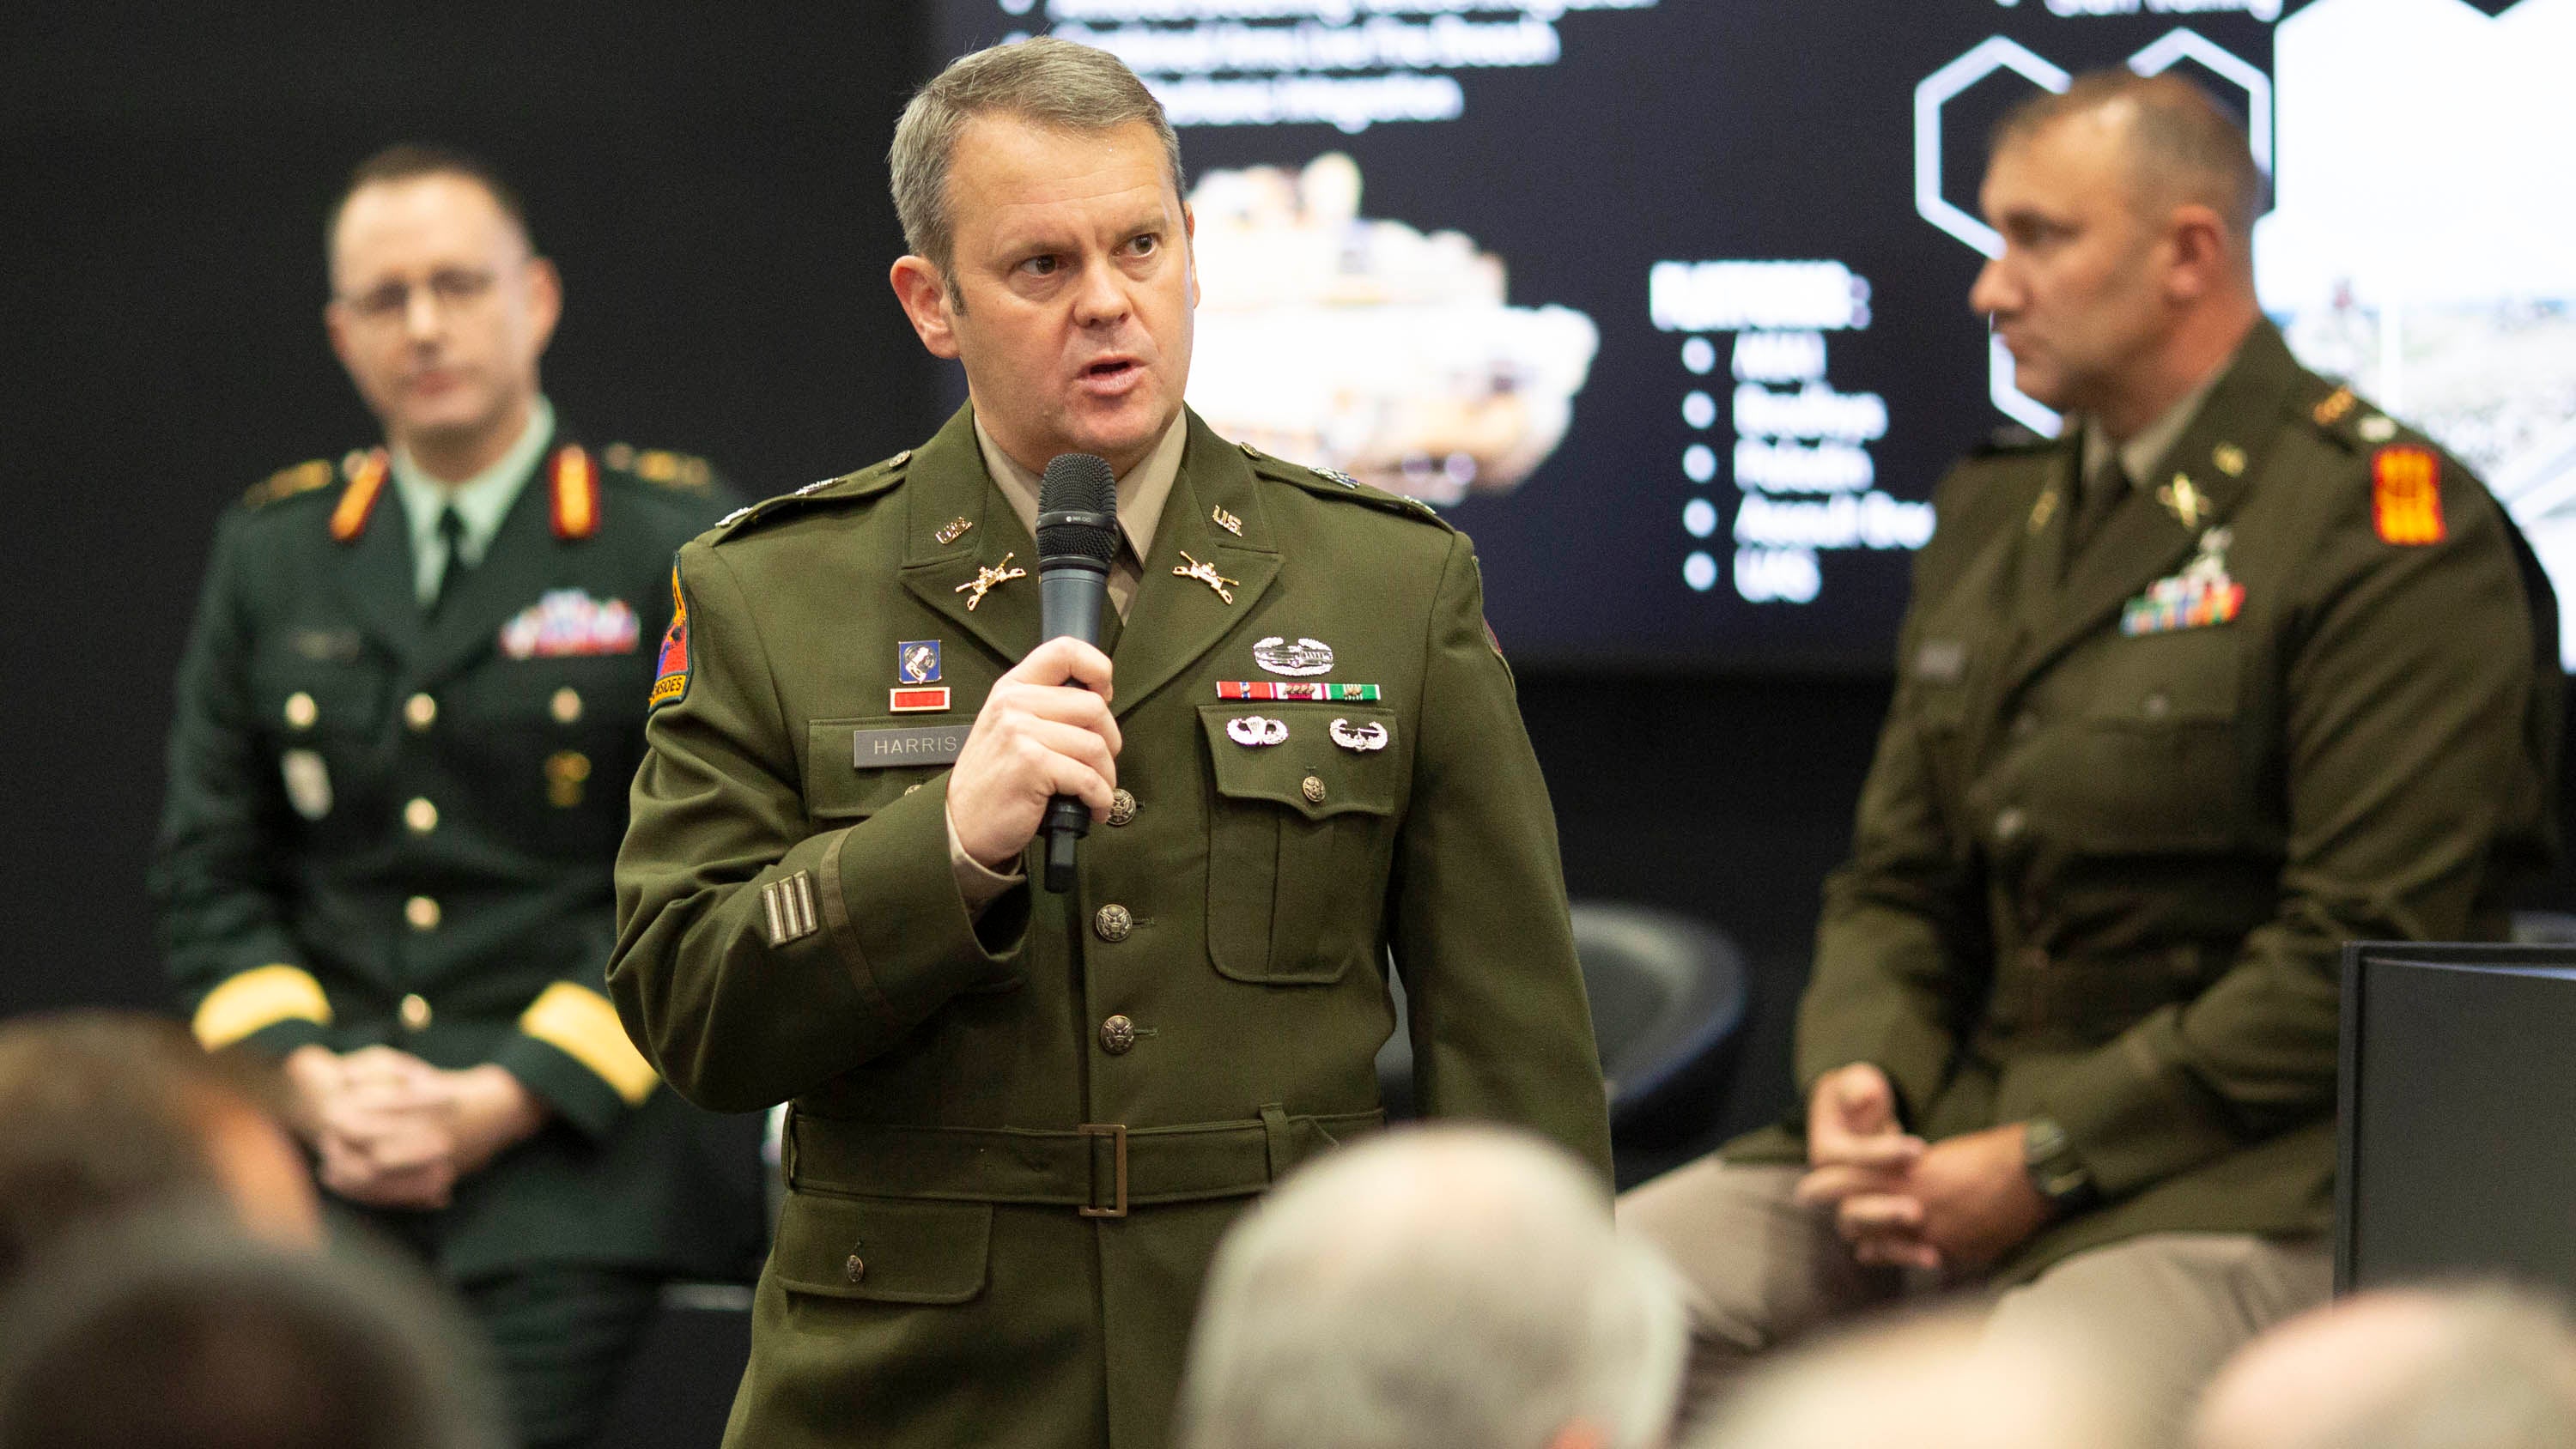 Col. Bryan Harris, commander of the 2nd Armored BCT, 1st Infantry Division, speaks during a Warriors Corner session about training Ukraine’s military at the AUSA 2023 Annual Meeting in Washington, D.C., Tuesday, Oct. 10, 2023. (Mike Morones for AUSA)